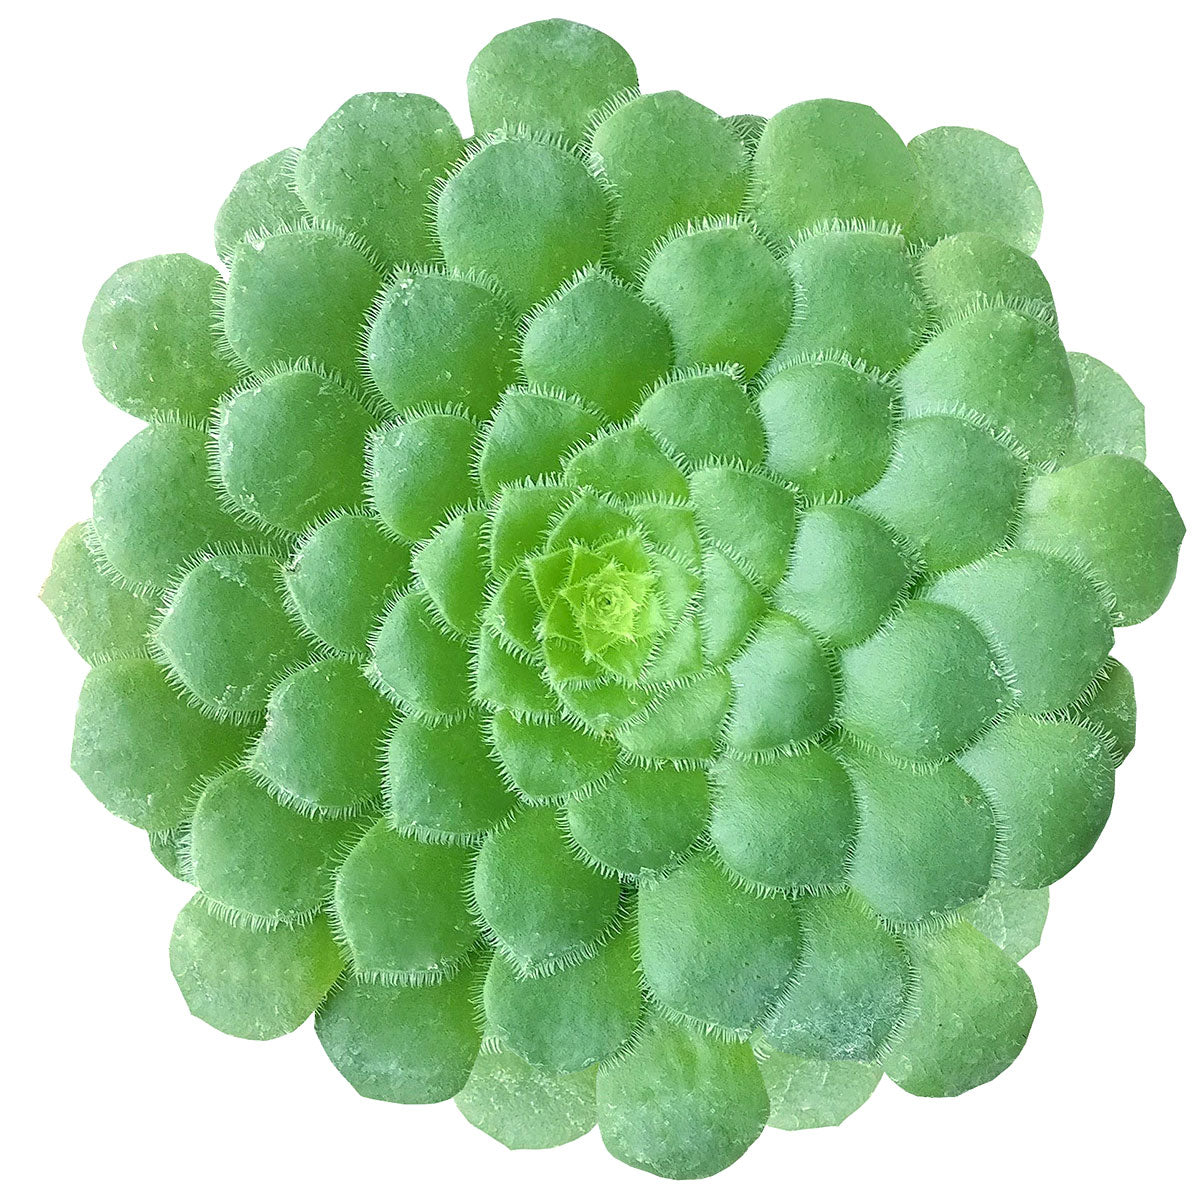 Aeonium Tabuliforme for Sale, dinner plate succulent care, aeonium dinner plate, aeonium dinner plate plant, aeonium tabuliforme care, aeonium tabuliforme variegated, types of succulents, desert cactus, desert plants names, how to water succulents, aeonium, edibal succulents, succulent definition, desert plants, desert flower, succulent meaning, succulents care, how to care for succulents, watering succulents, how to plan succulents, succulents box, gift, decor